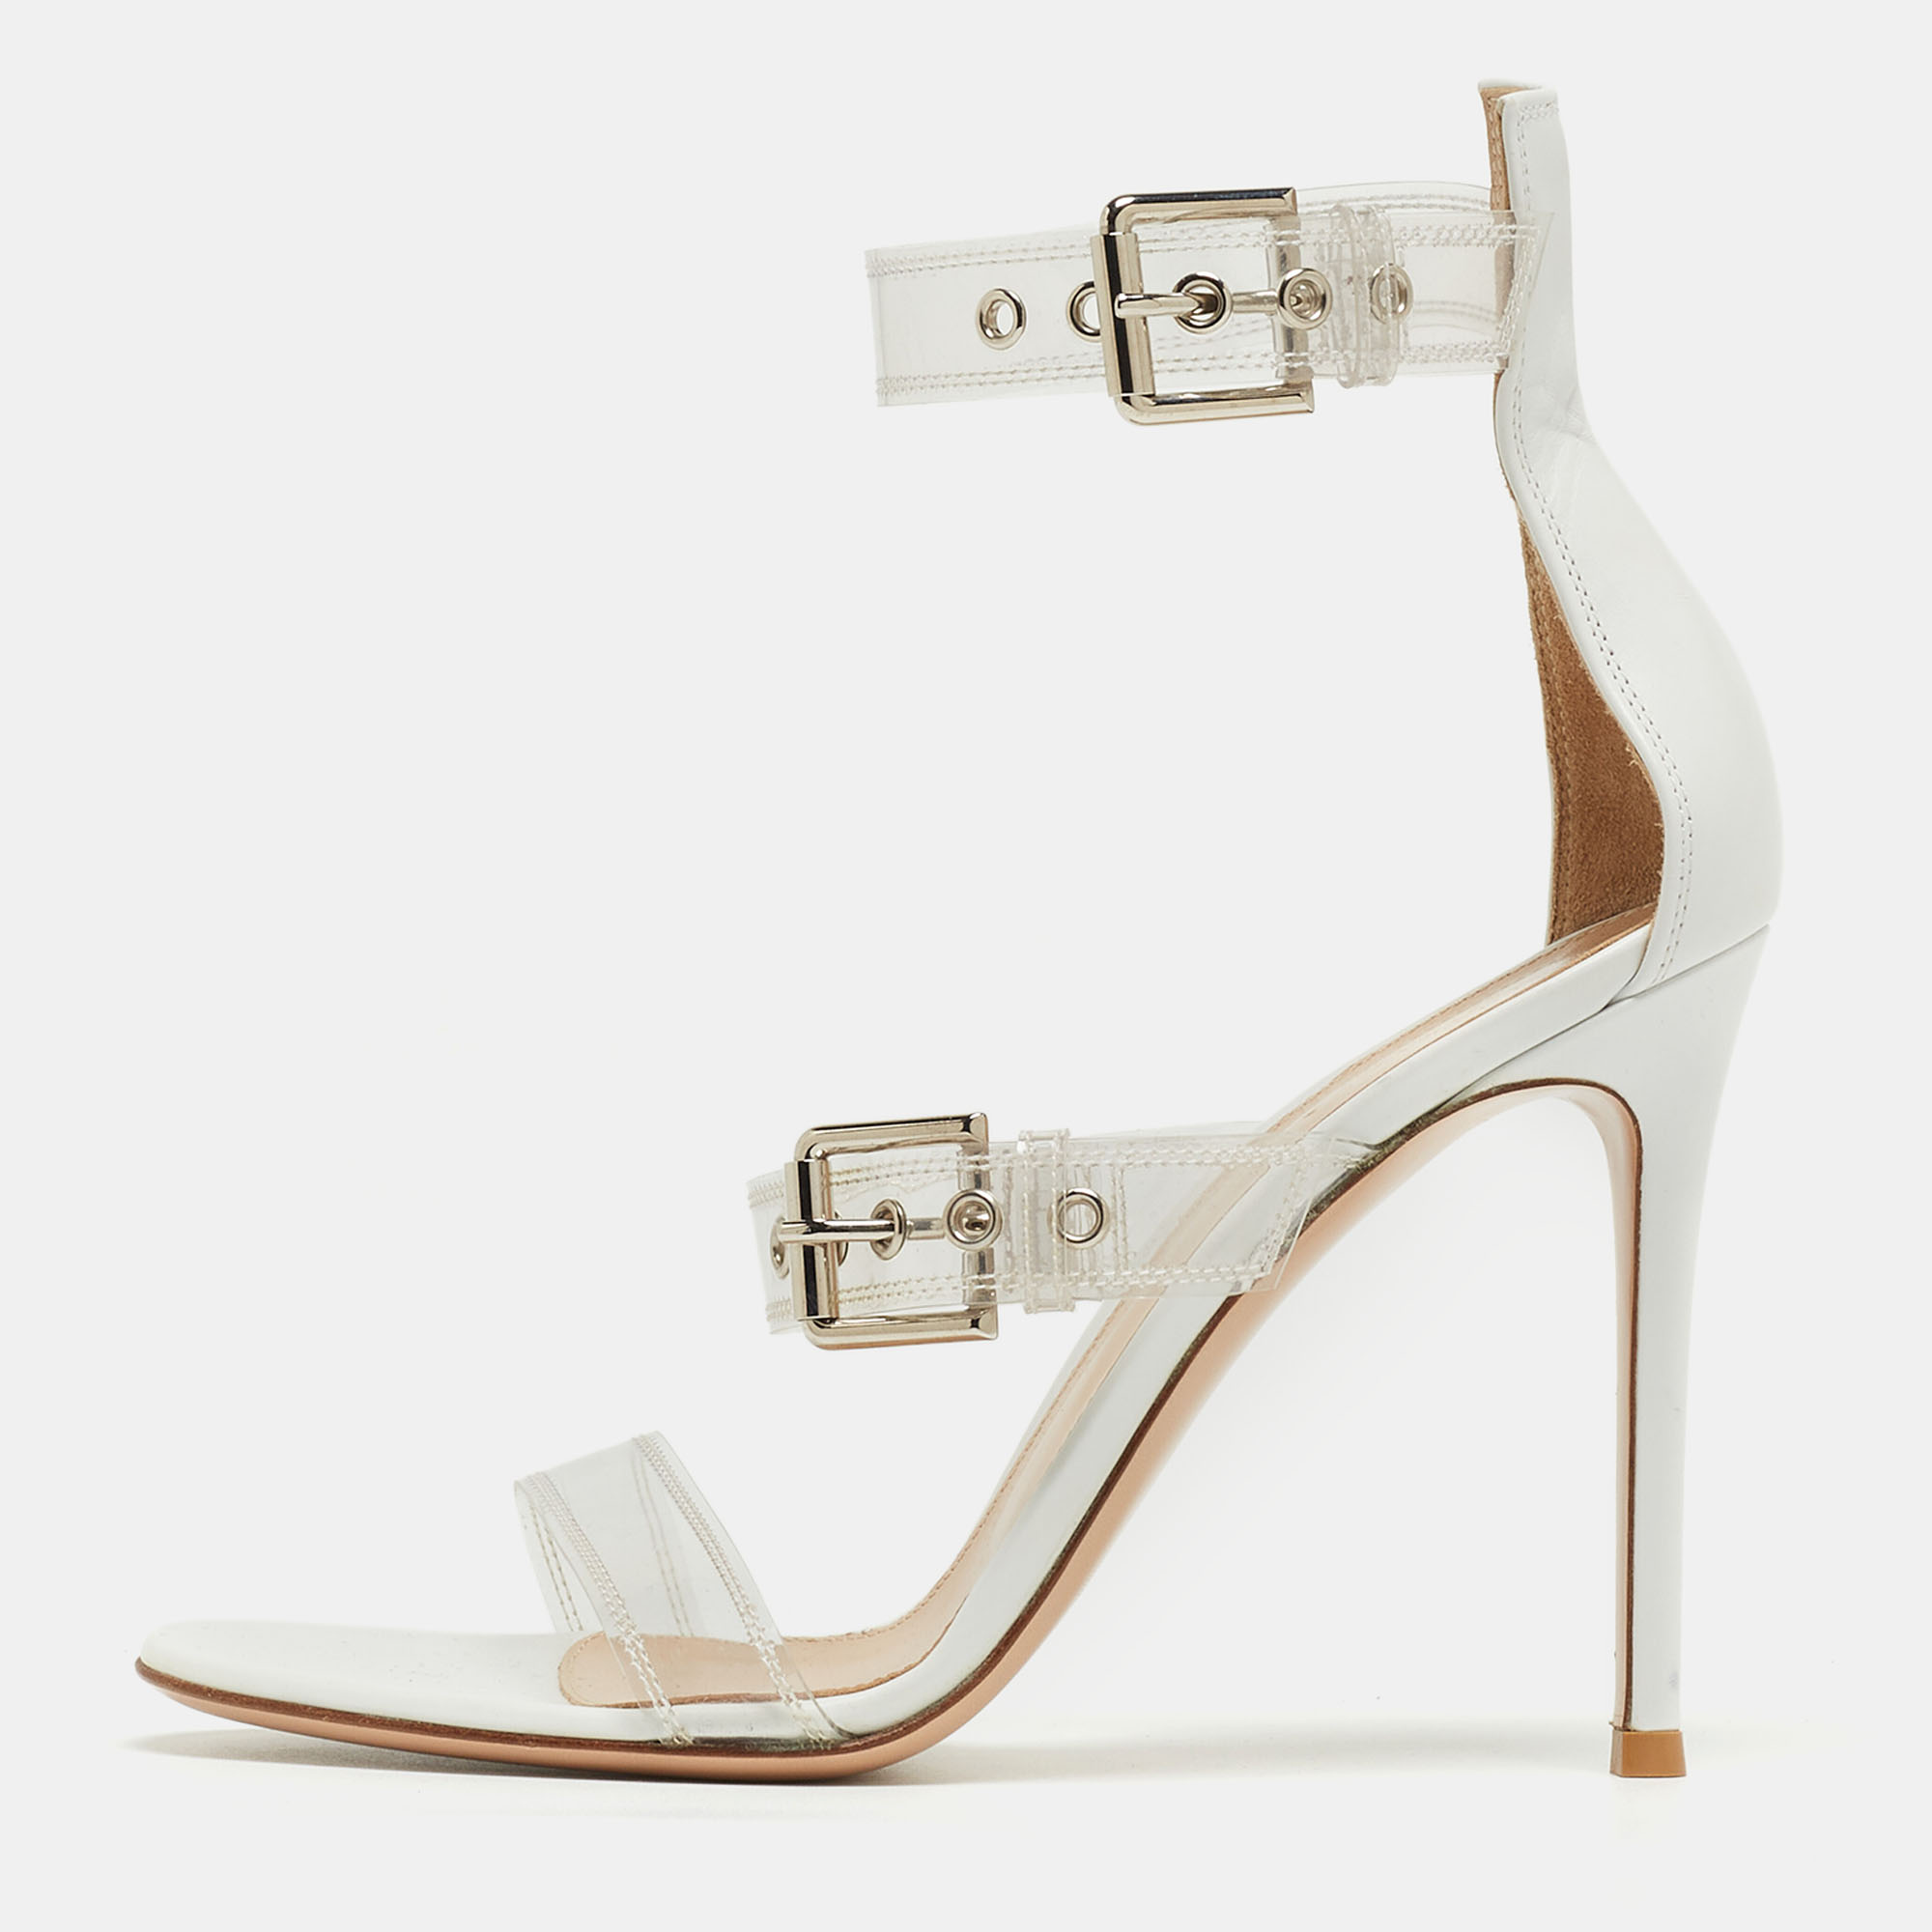 Gianvito rossi white leather and pvc ankle strap sandals size 39